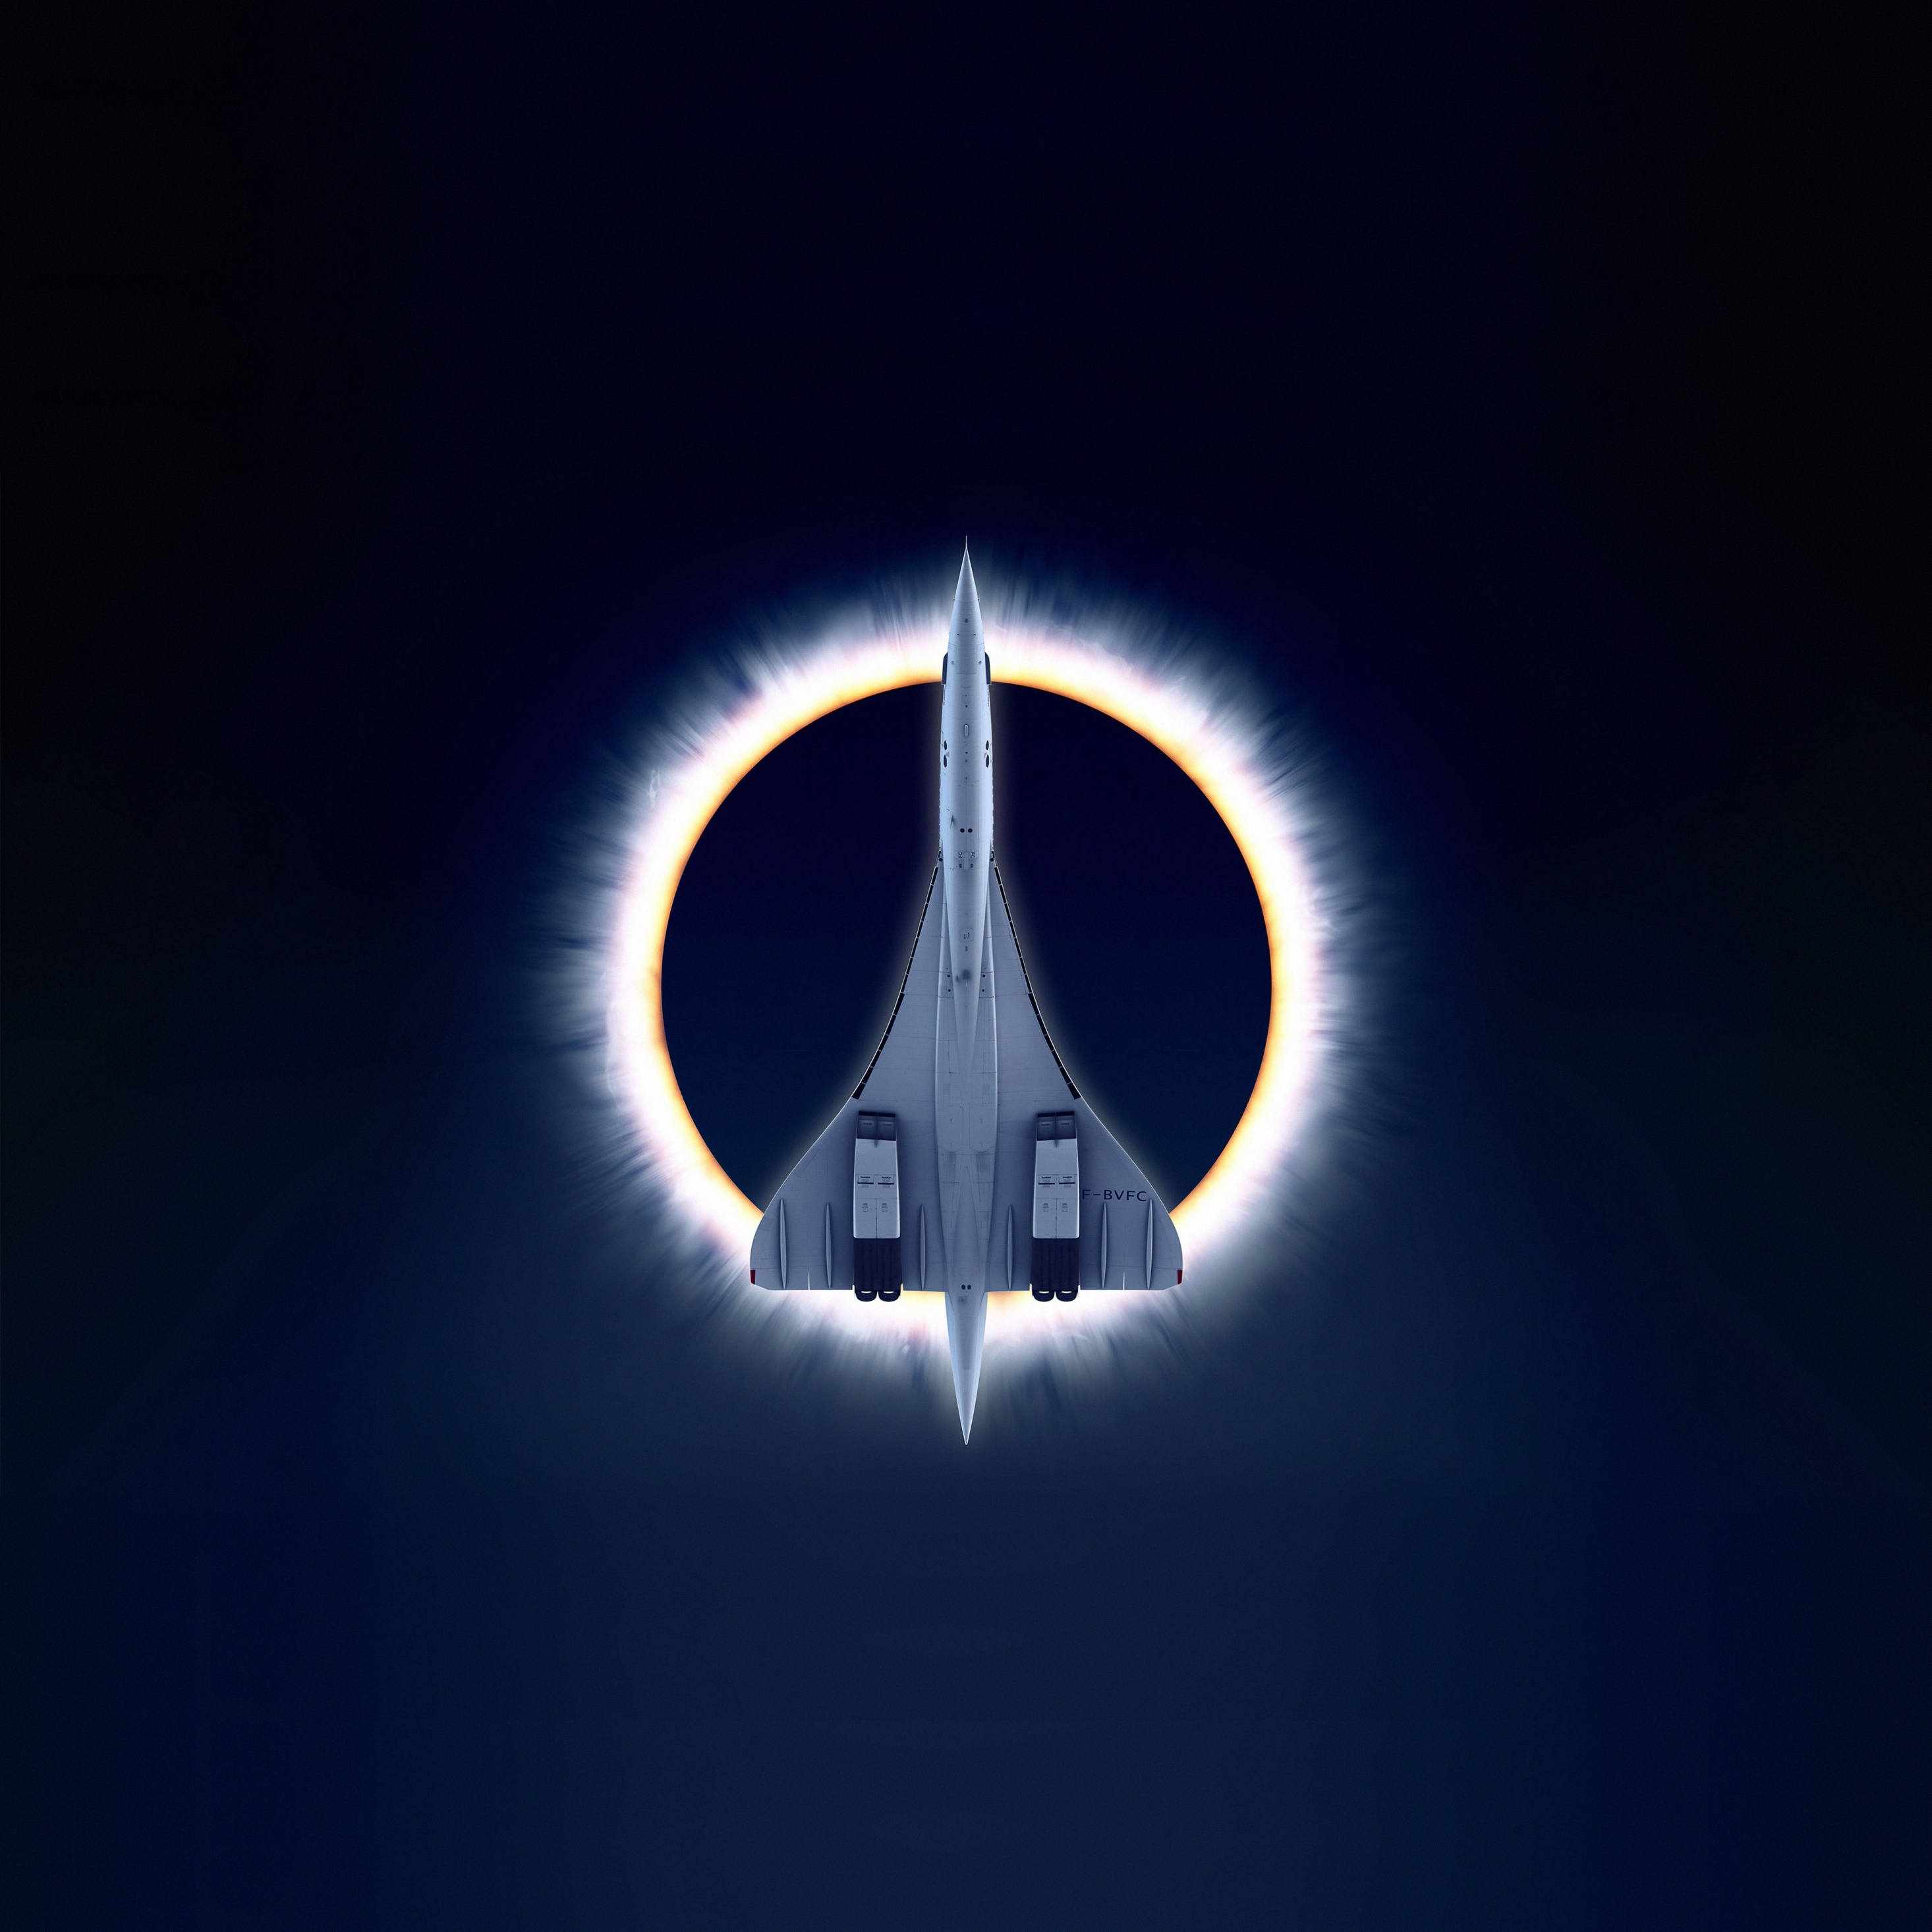 Concorde Carre, eclipse, airplane, moon, aircraft, 2932x2932 wallpaper